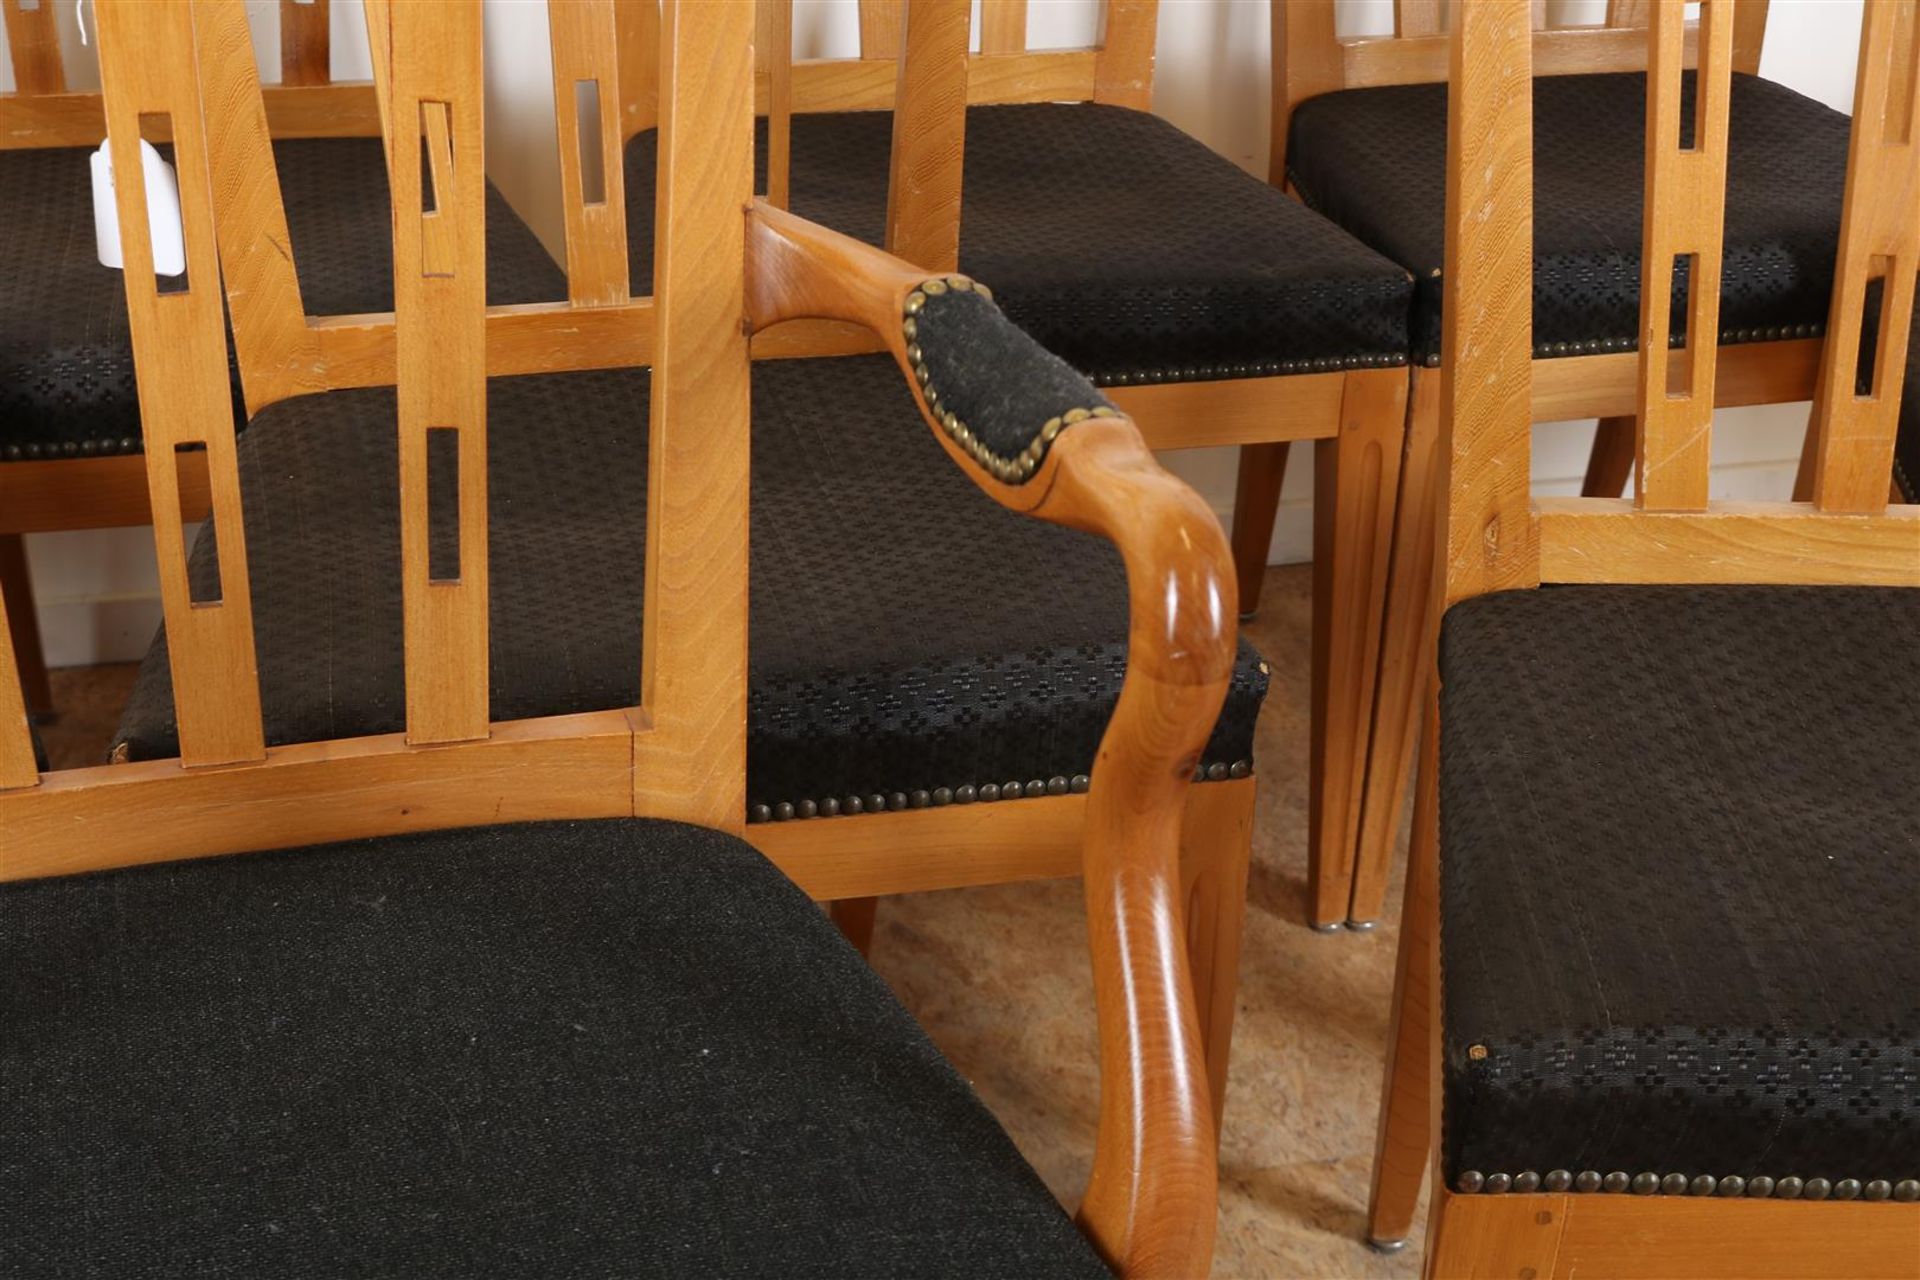 Series of 14 oak chairs with elaborate backrest and green fabric seat, including 1 arm chair. - Image 3 of 7